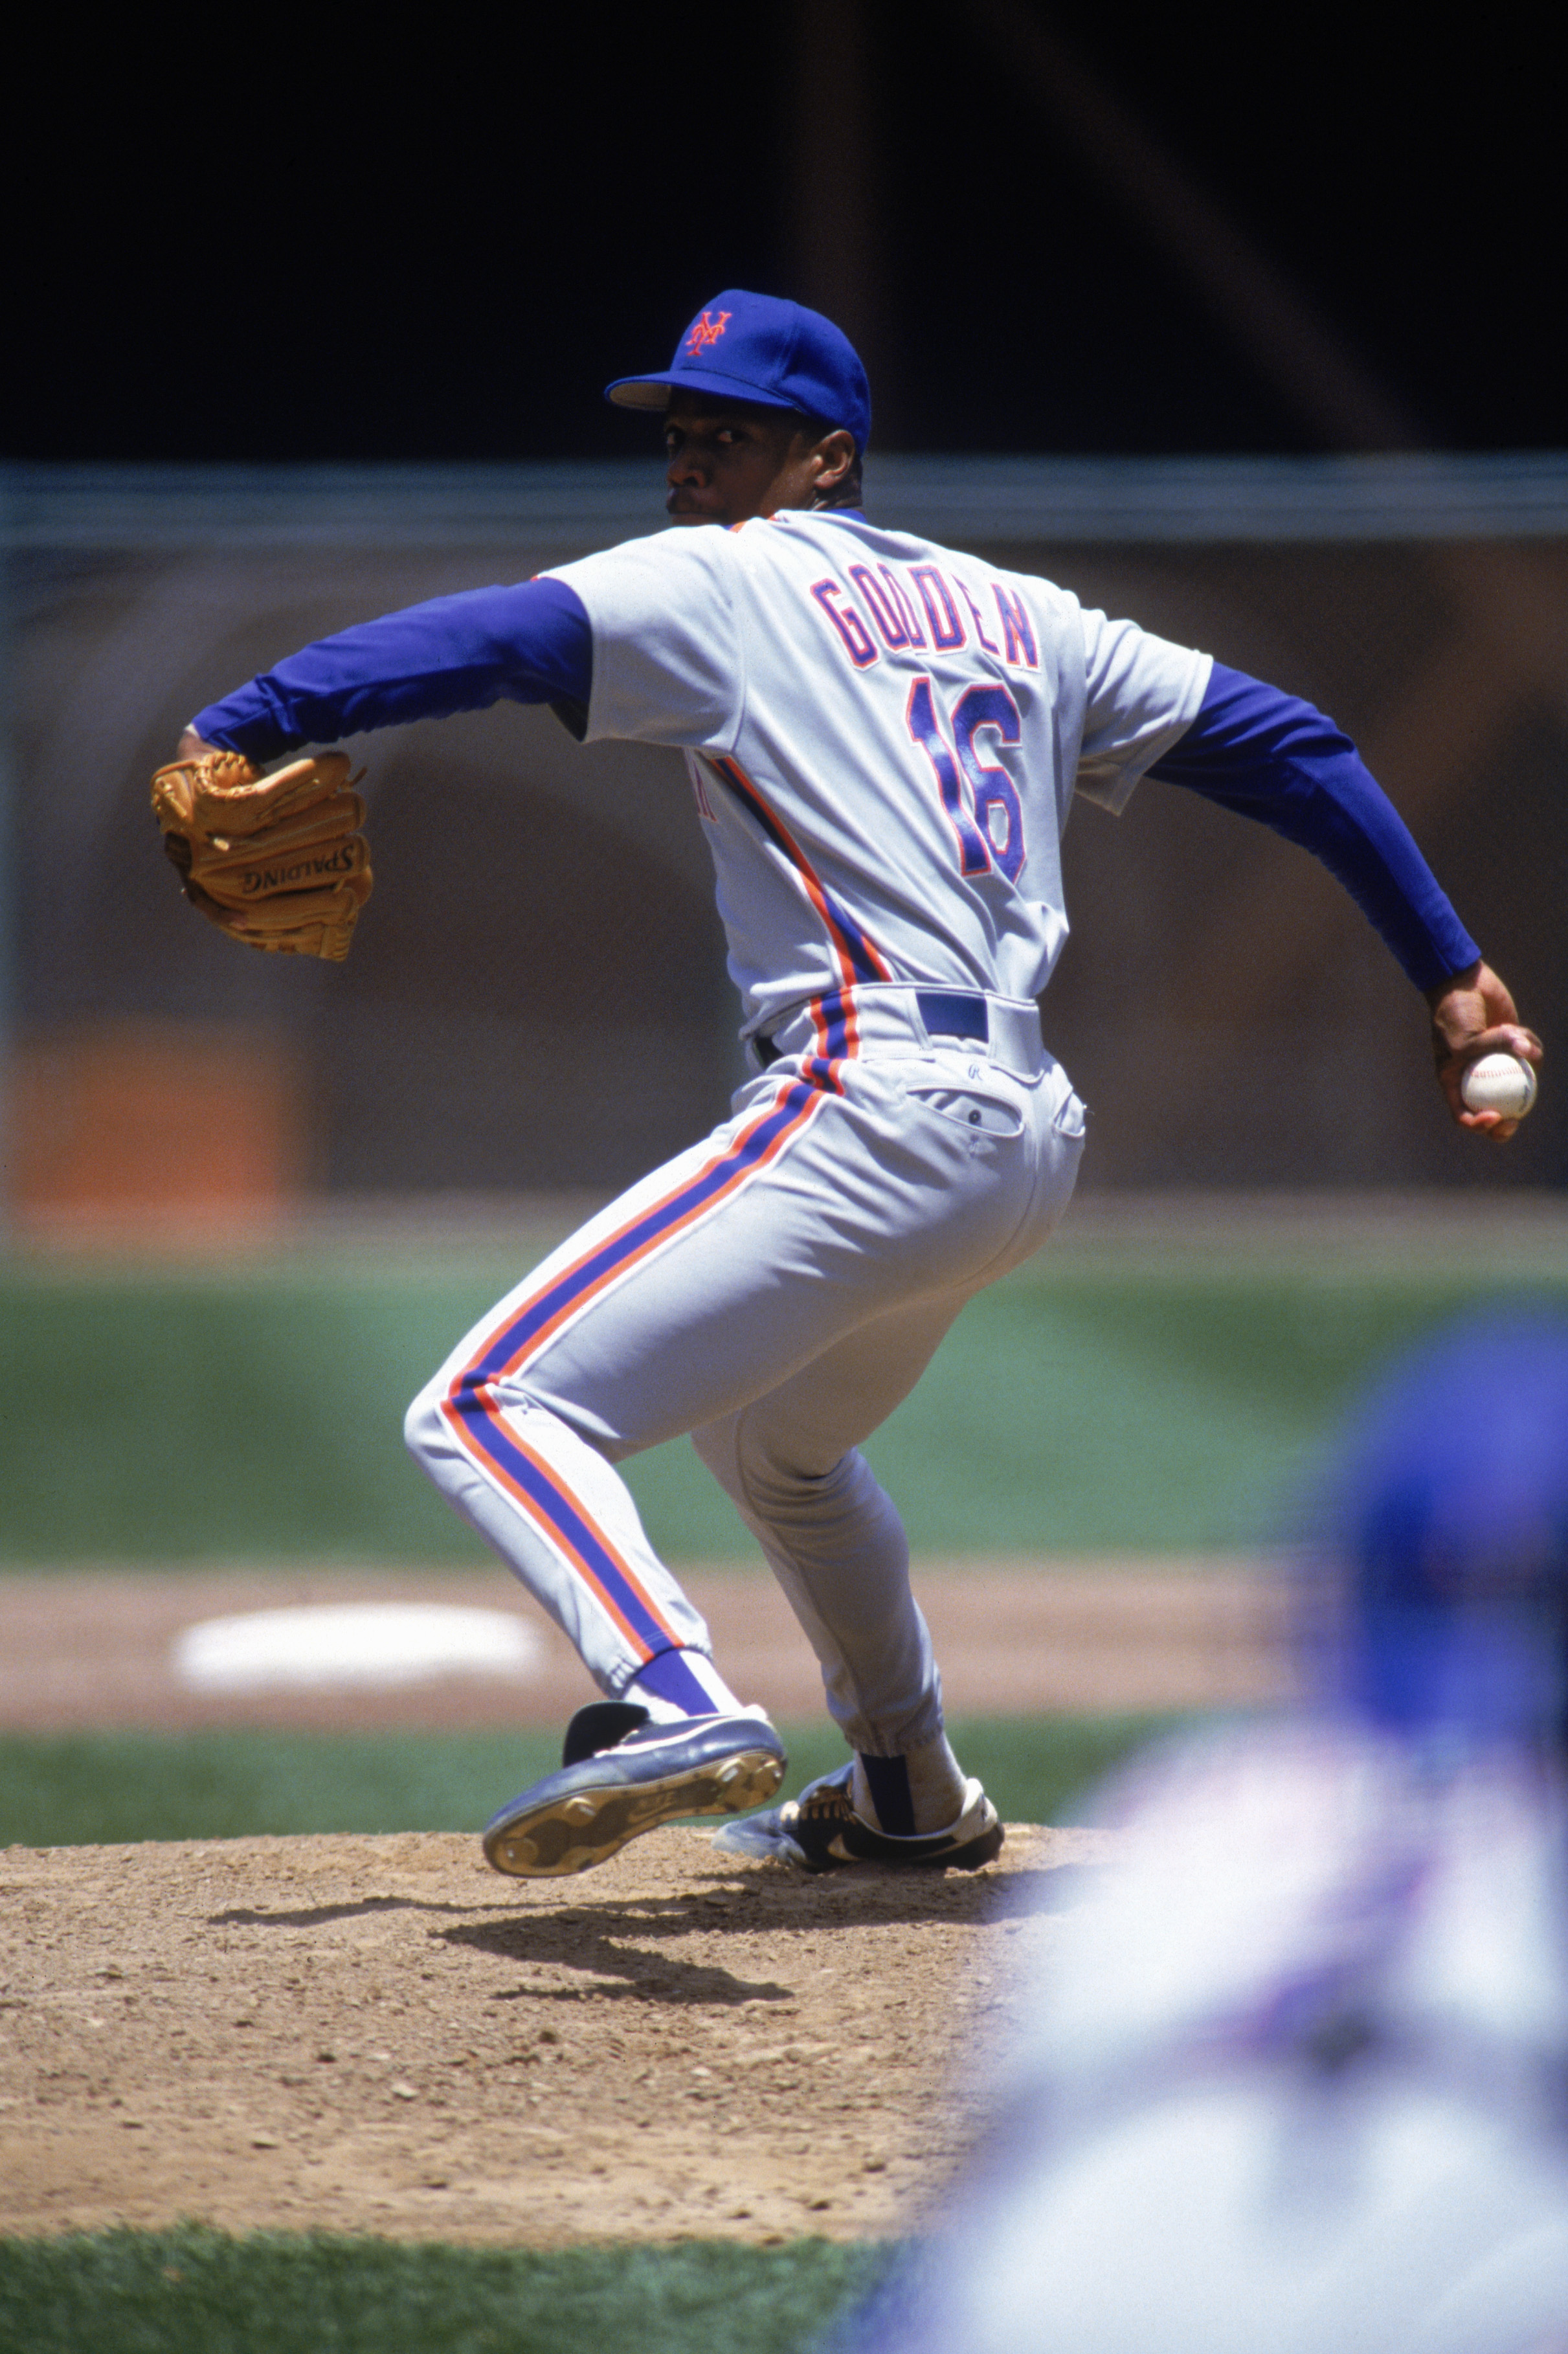 Dwight Gooden and the Top 15 Starting Pitchers in New York Mets